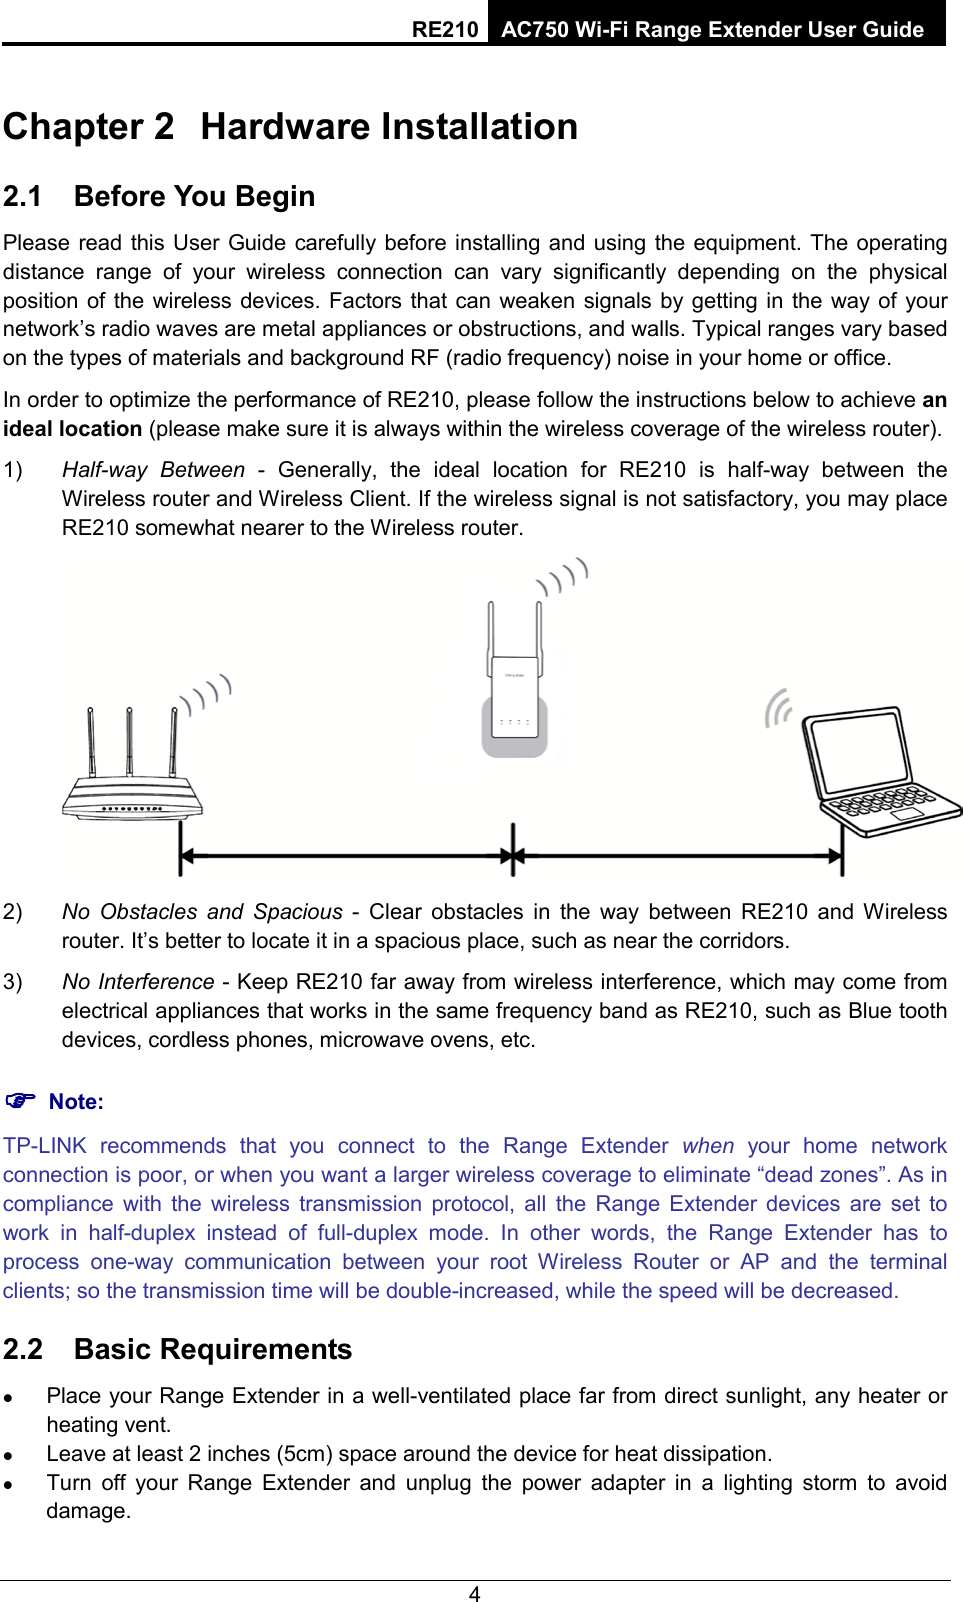 RE210 AC750 Wi-Fi Range Extender User Guide  Chapter 2 Hardware Installation 2.1 Before You Begin Please read this User Guide carefully before installing and using the equipment. The operating distance range of your wireless connection can vary significantly depending on the physical position of the wireless devices. Factors that can weaken signals by getting in the way of your network’s radio waves are metal appliances or obstructions, and walls. Typical ranges vary based on the types of materials and background RF (radio frequency) noise in your home or office. In order to optimize the performance of RE210, please follow the instructions below to achieve an ideal location (please make sure it is always within the wireless coverage of the wireless router). 1) Half-way Between - Generally, the ideal location for  RE210  is  half-way between the Wireless router and Wireless Client. If the wireless signal is not satisfactory, you may place RE210 somewhat nearer to the Wireless router.  2) No Obstacles and Spacious - Clear  obstacles in the way between RE210  and Wireless router. It’s better to locate it in a spacious place, such as near the corridors.   3) No Interference - Keep RE210 far away from wireless interference, which may come from electrical appliances that works in the same frequency band as RE210, such as Blue tooth devices, cordless phones, microwave ovens, etc.  Note: TP-LINK  recommends that you connect to the Range Extender when your home network connection is poor, or when you want a larger wireless coverage to eliminate “dead zones”. As in compliance with the wireless transmission protocol, all the Range Extender devices are set to work in half-duplex instead of full-duplex mode. In other words, the Range Extender has to process one-way communication between your root Wireless Router or AP and the terminal clients; so the transmission time will be double-increased, while the speed will be decreased.   2.2 Basic Requirements  Place your Range Extender in a well-ventilated place far from direct sunlight, any heater or heating vent.  Leave at least 2 inches (5cm) space around the device for heat dissipation.  Turn off your Range Extender and unplug the power adapter in a lighting storm to avoid damage. 4 